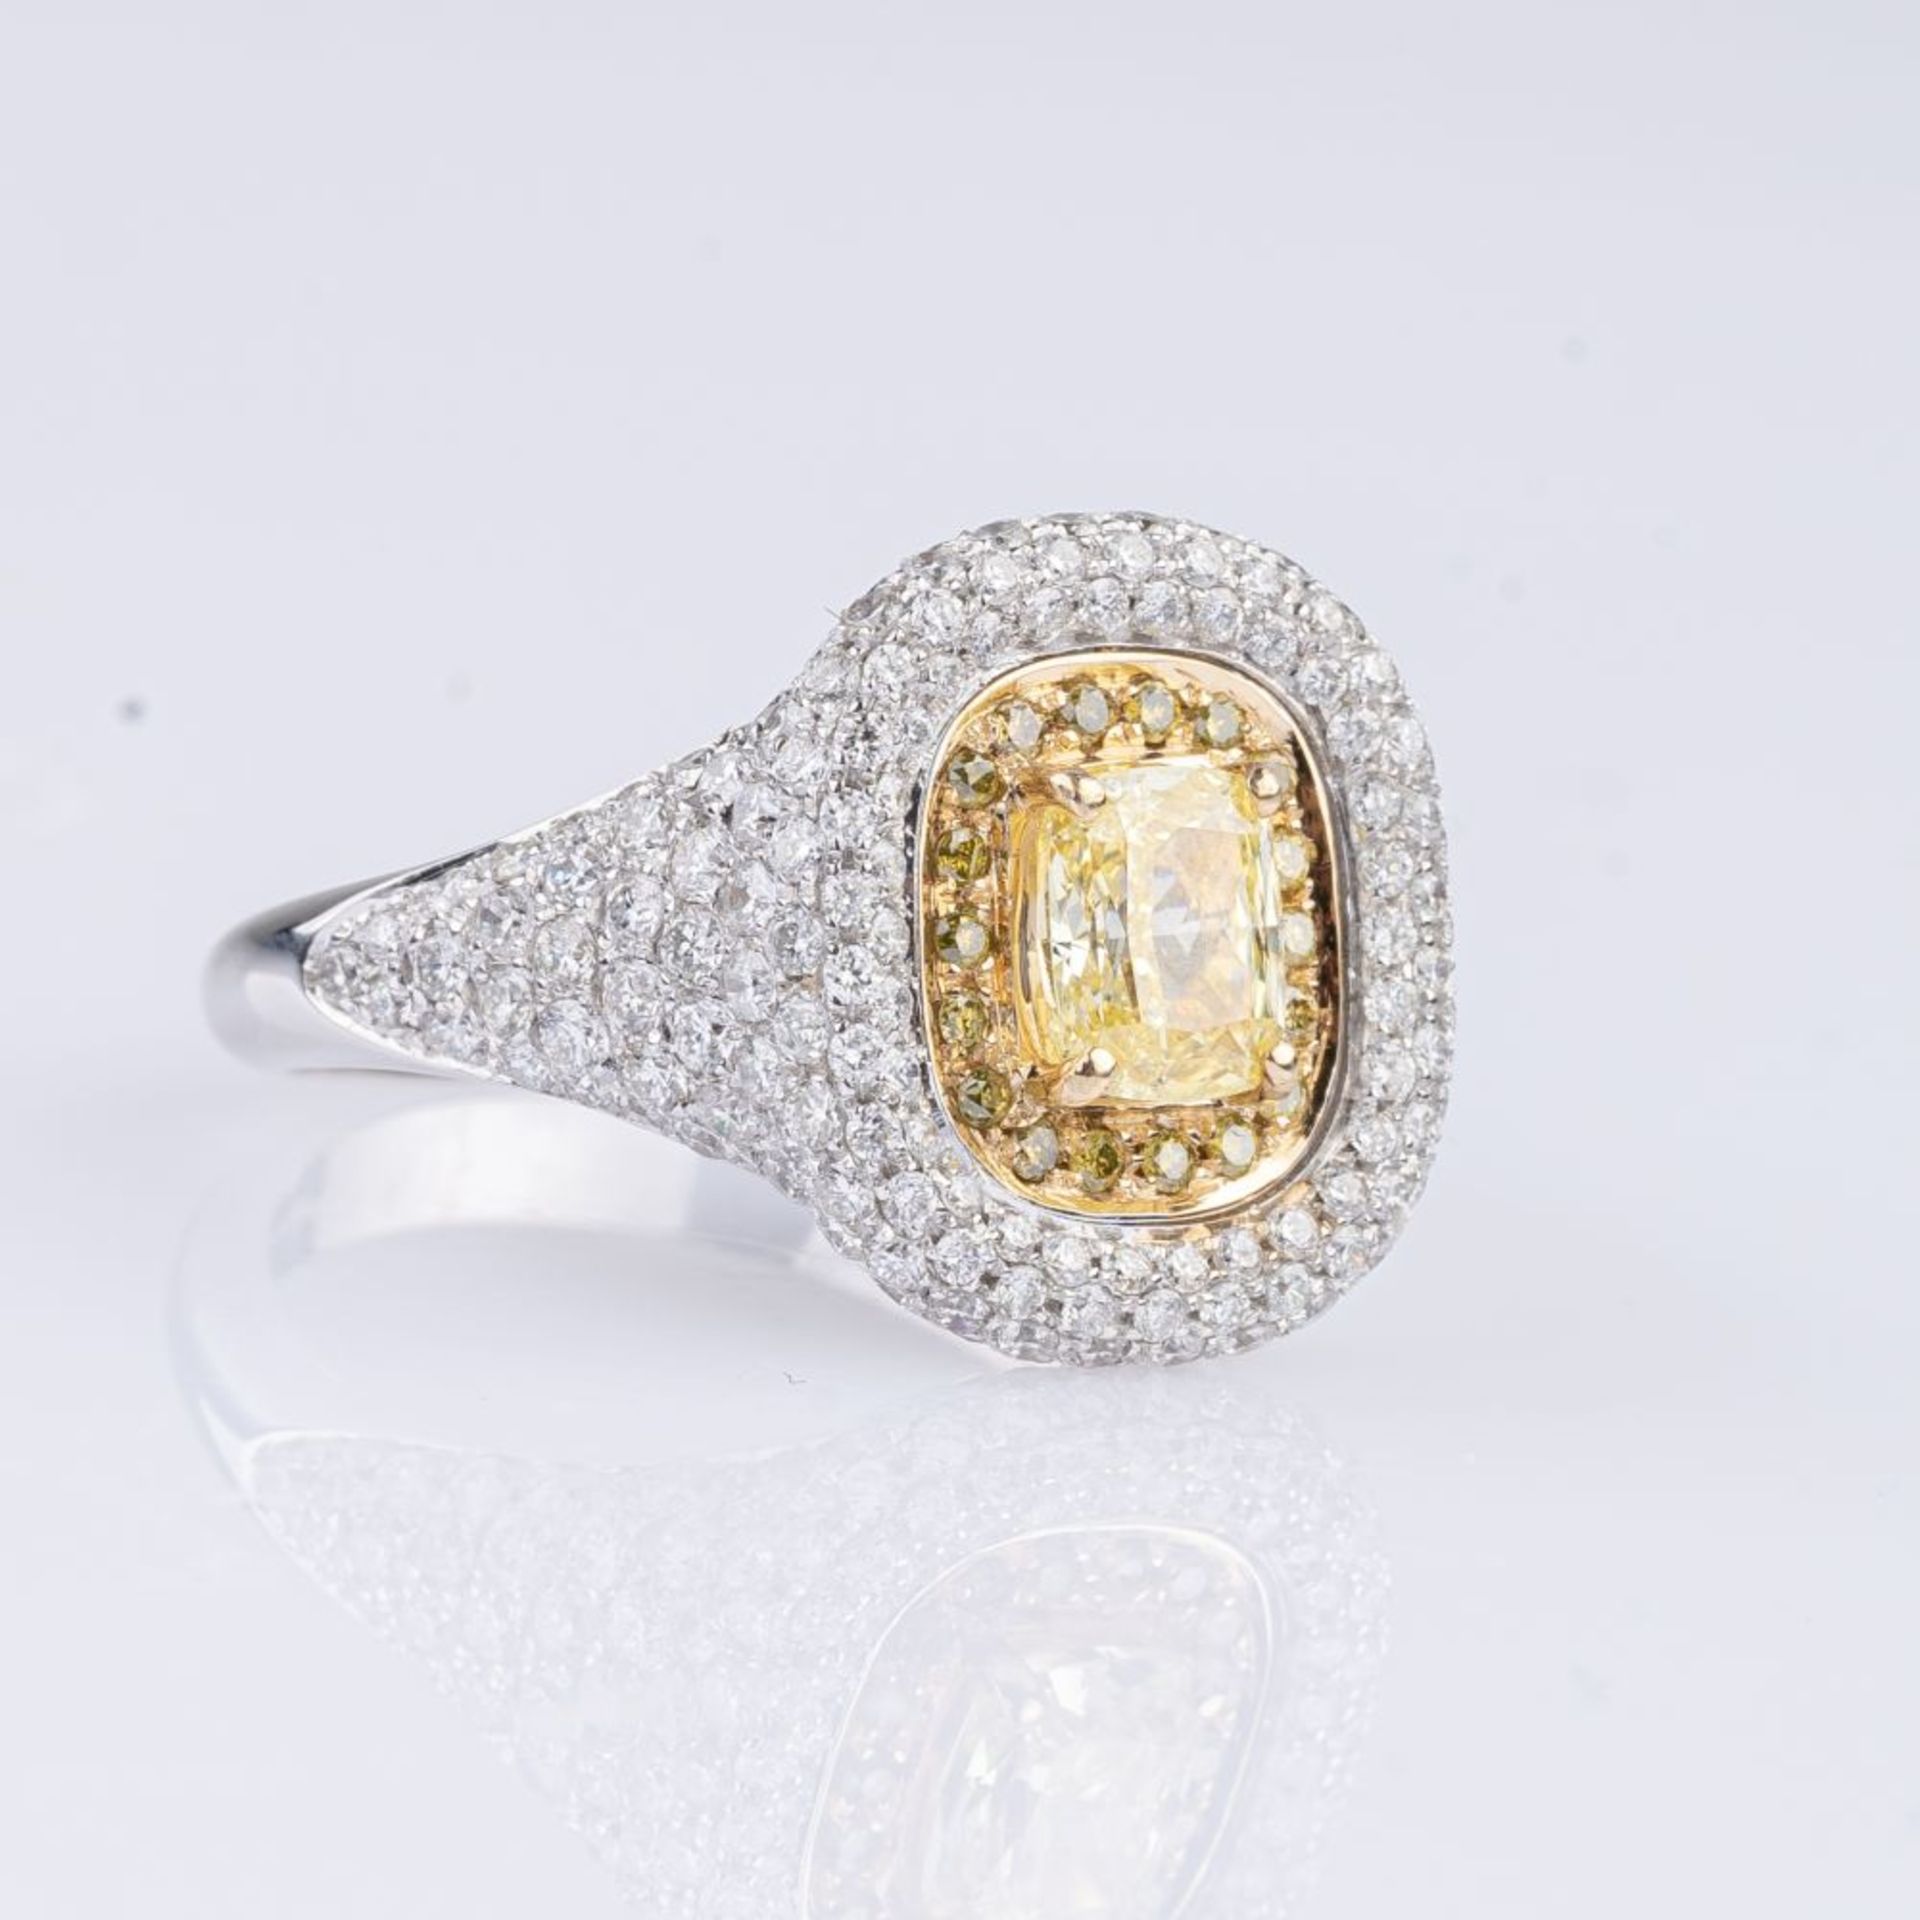 A Fancy Diamond Ring. - Image 2 of 4